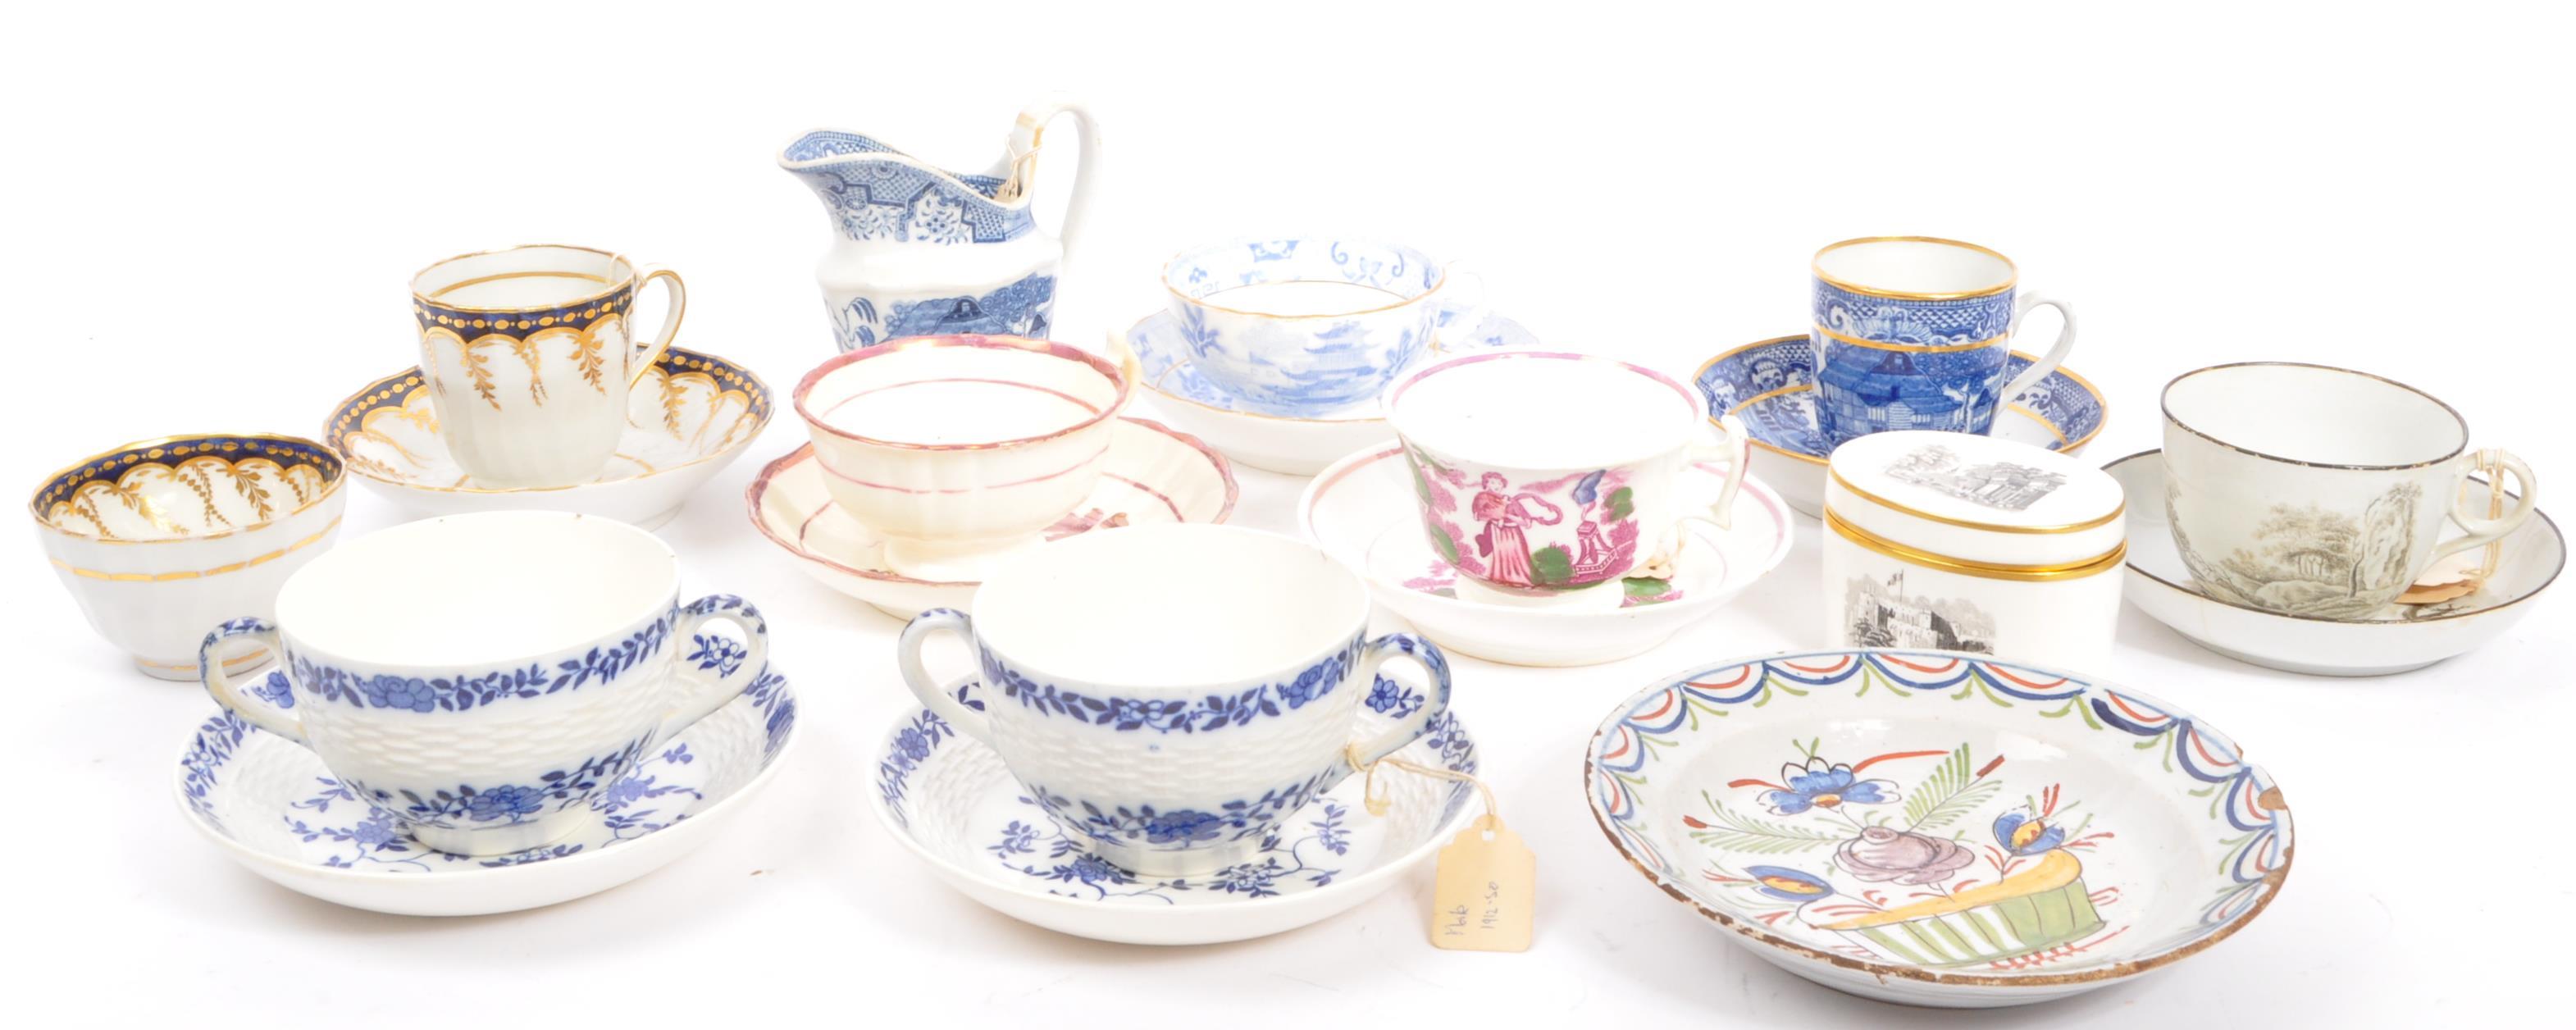 A COLLECTION OF 19TH CENTURY TEA CUPS AND SAUCERS